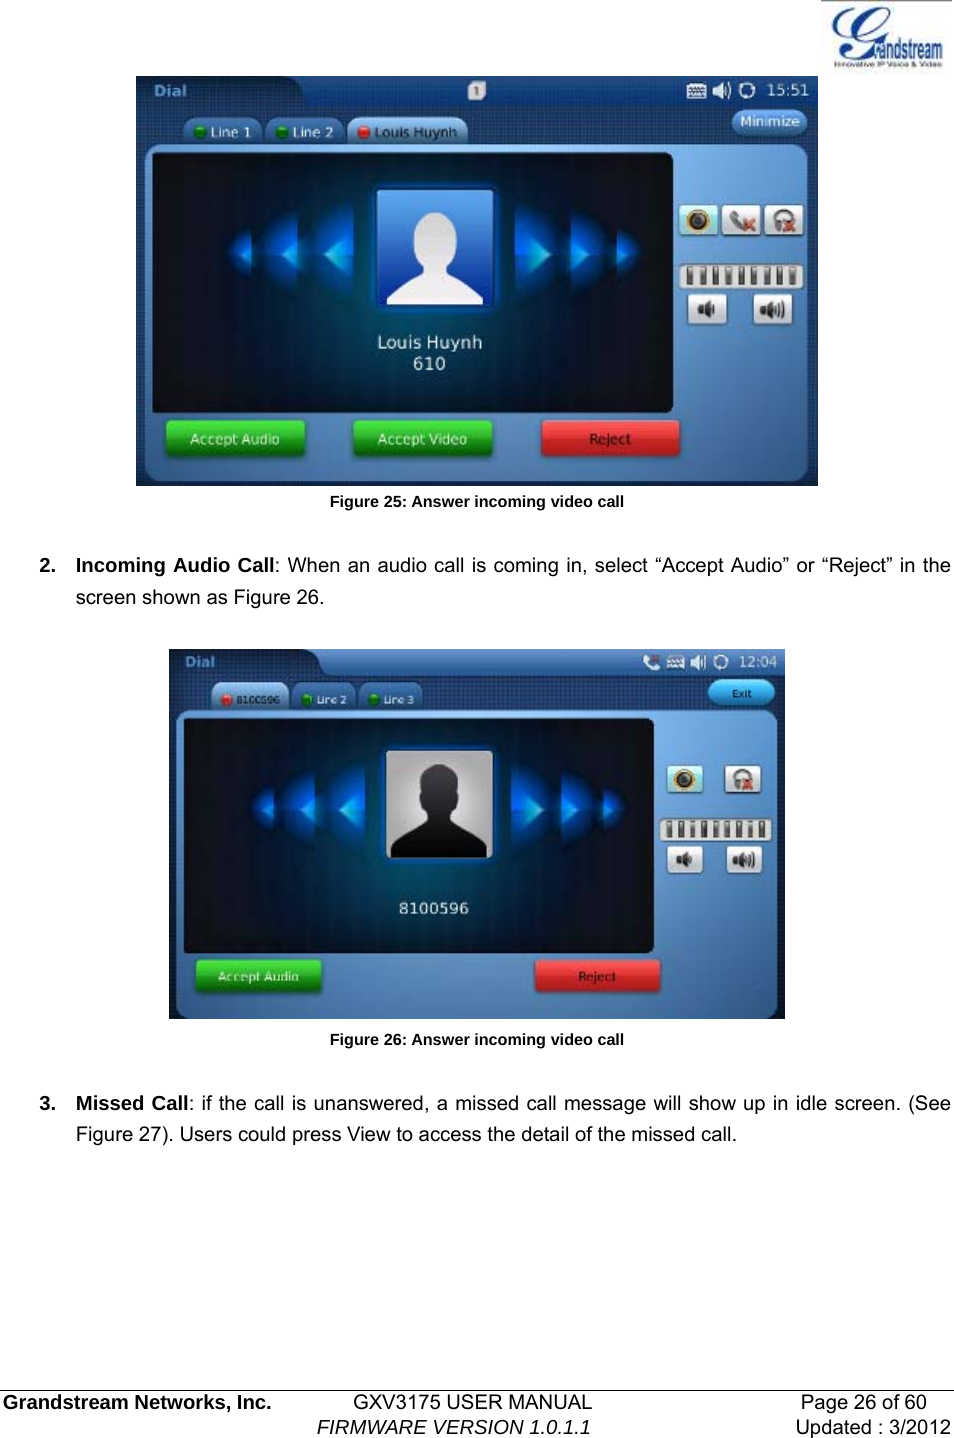   Grandstream Networks, Inc.        GXV3175 USER MANUAL                     Page 26 of 60                                FIRMWARE VERSION 1.0.1.1 Updated : 3/2012   Figure 25: Answer incoming video call  2. Incoming Audio Call: When an audio call is coming in, select “Accept Audio” or “Reject” in the screen shown as Figure 26.    Figure 26: Answer incoming video call  3. Missed Call: if the call is unanswered, a missed call message will show up in idle screen. (See Figure 27). Users could press View to access the detail of the missed call. 